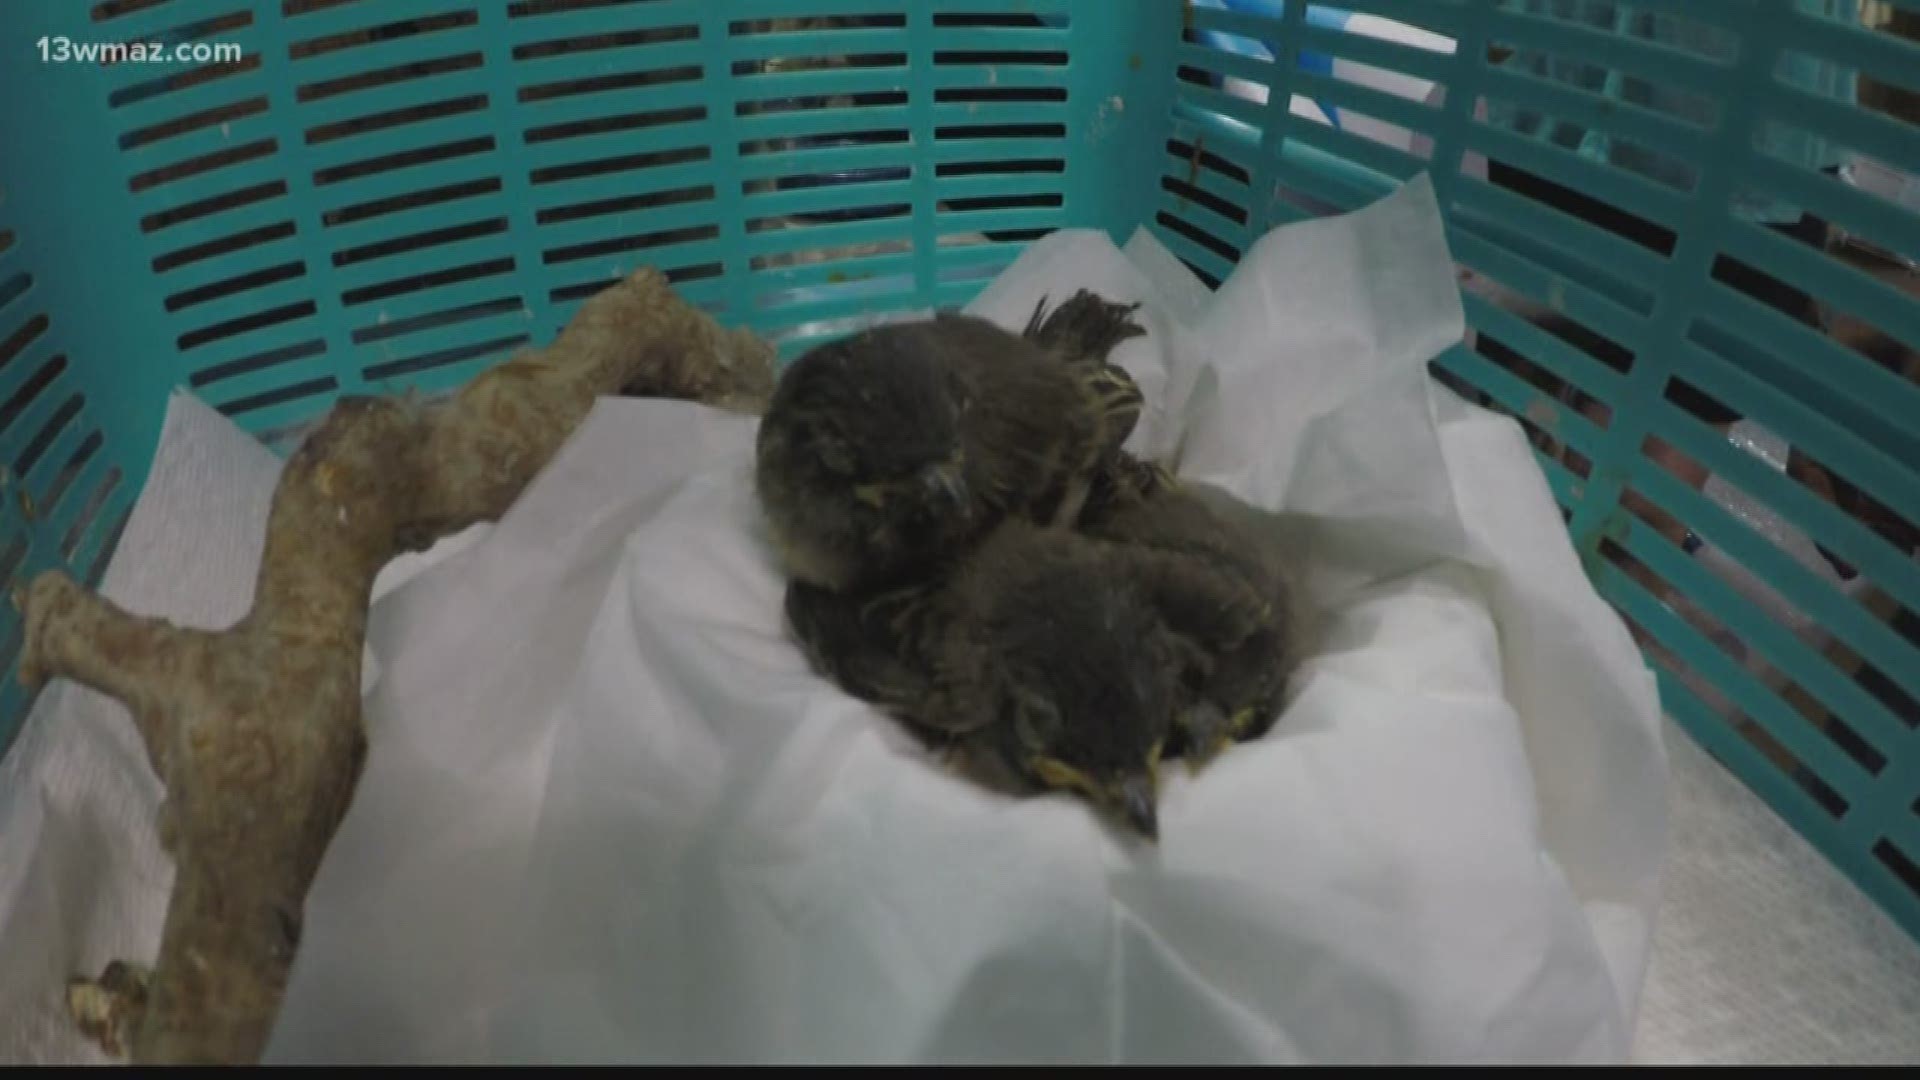 13WMAZ had recenty had a bird lay eggs on our campus, so we had our own question to Verify: Will a mother bird still care for its young if the chicks are touched by humans?